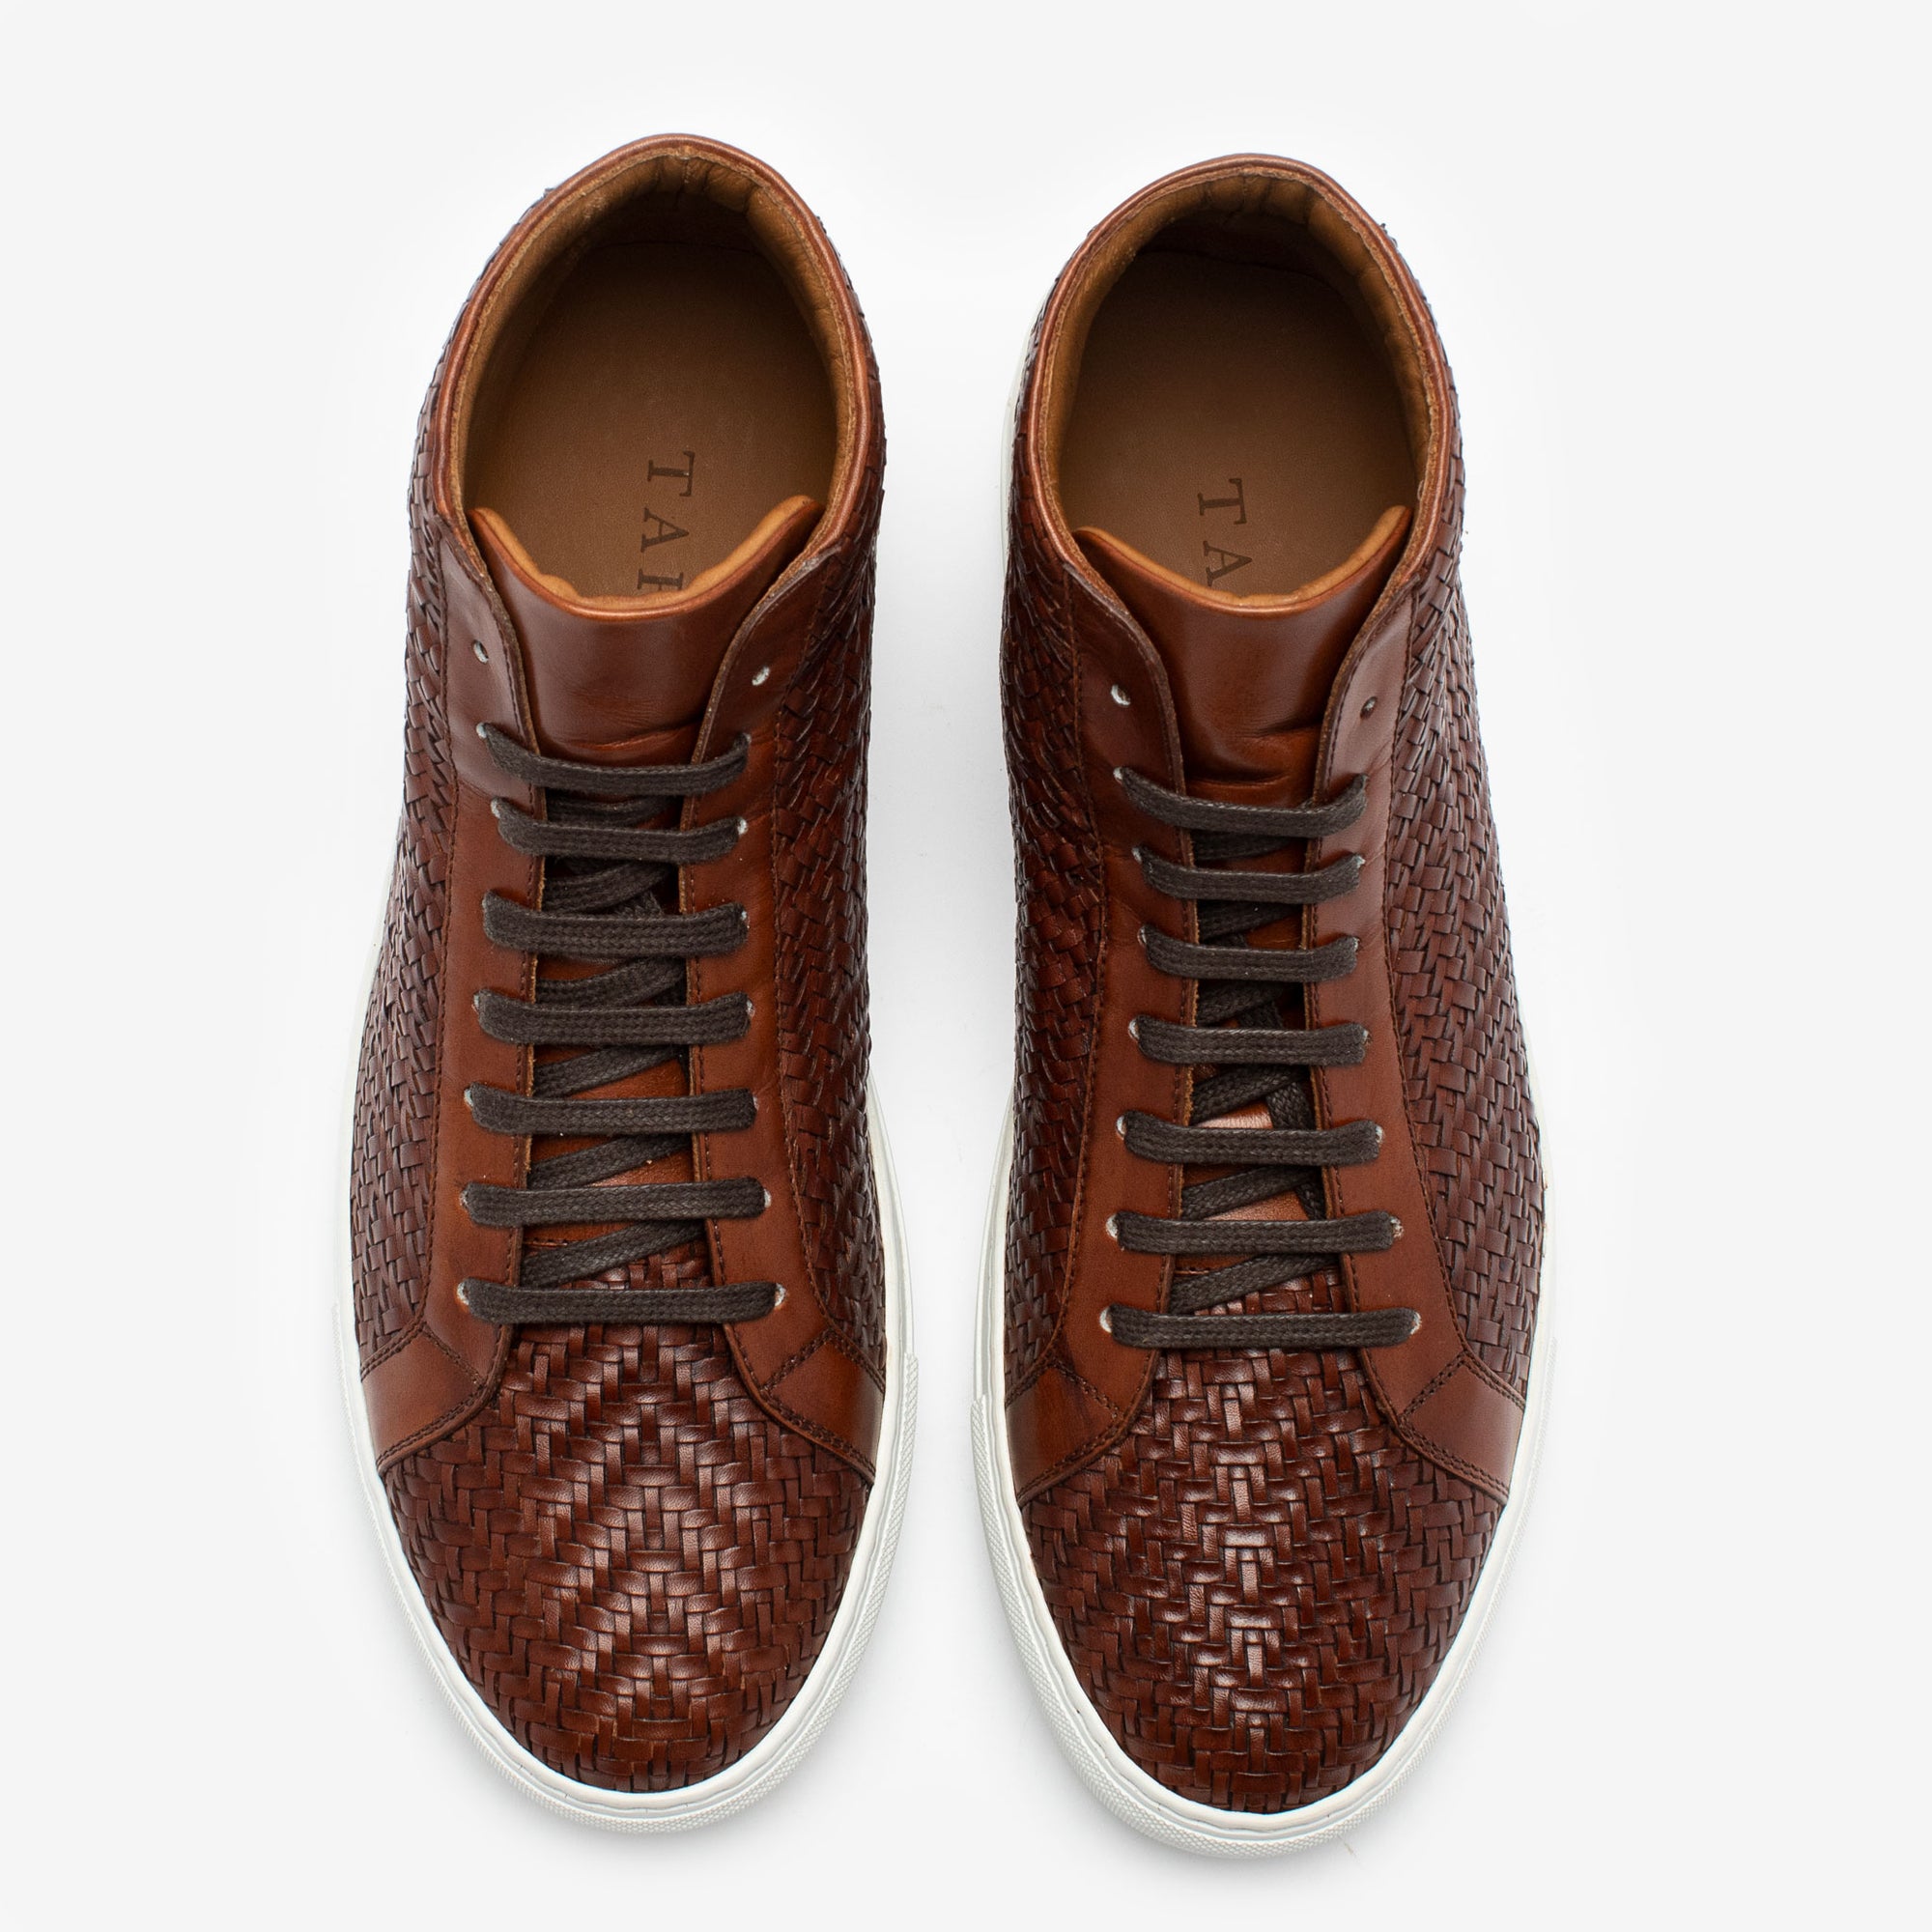 Are Louis Vuitton Shoes Good Quality